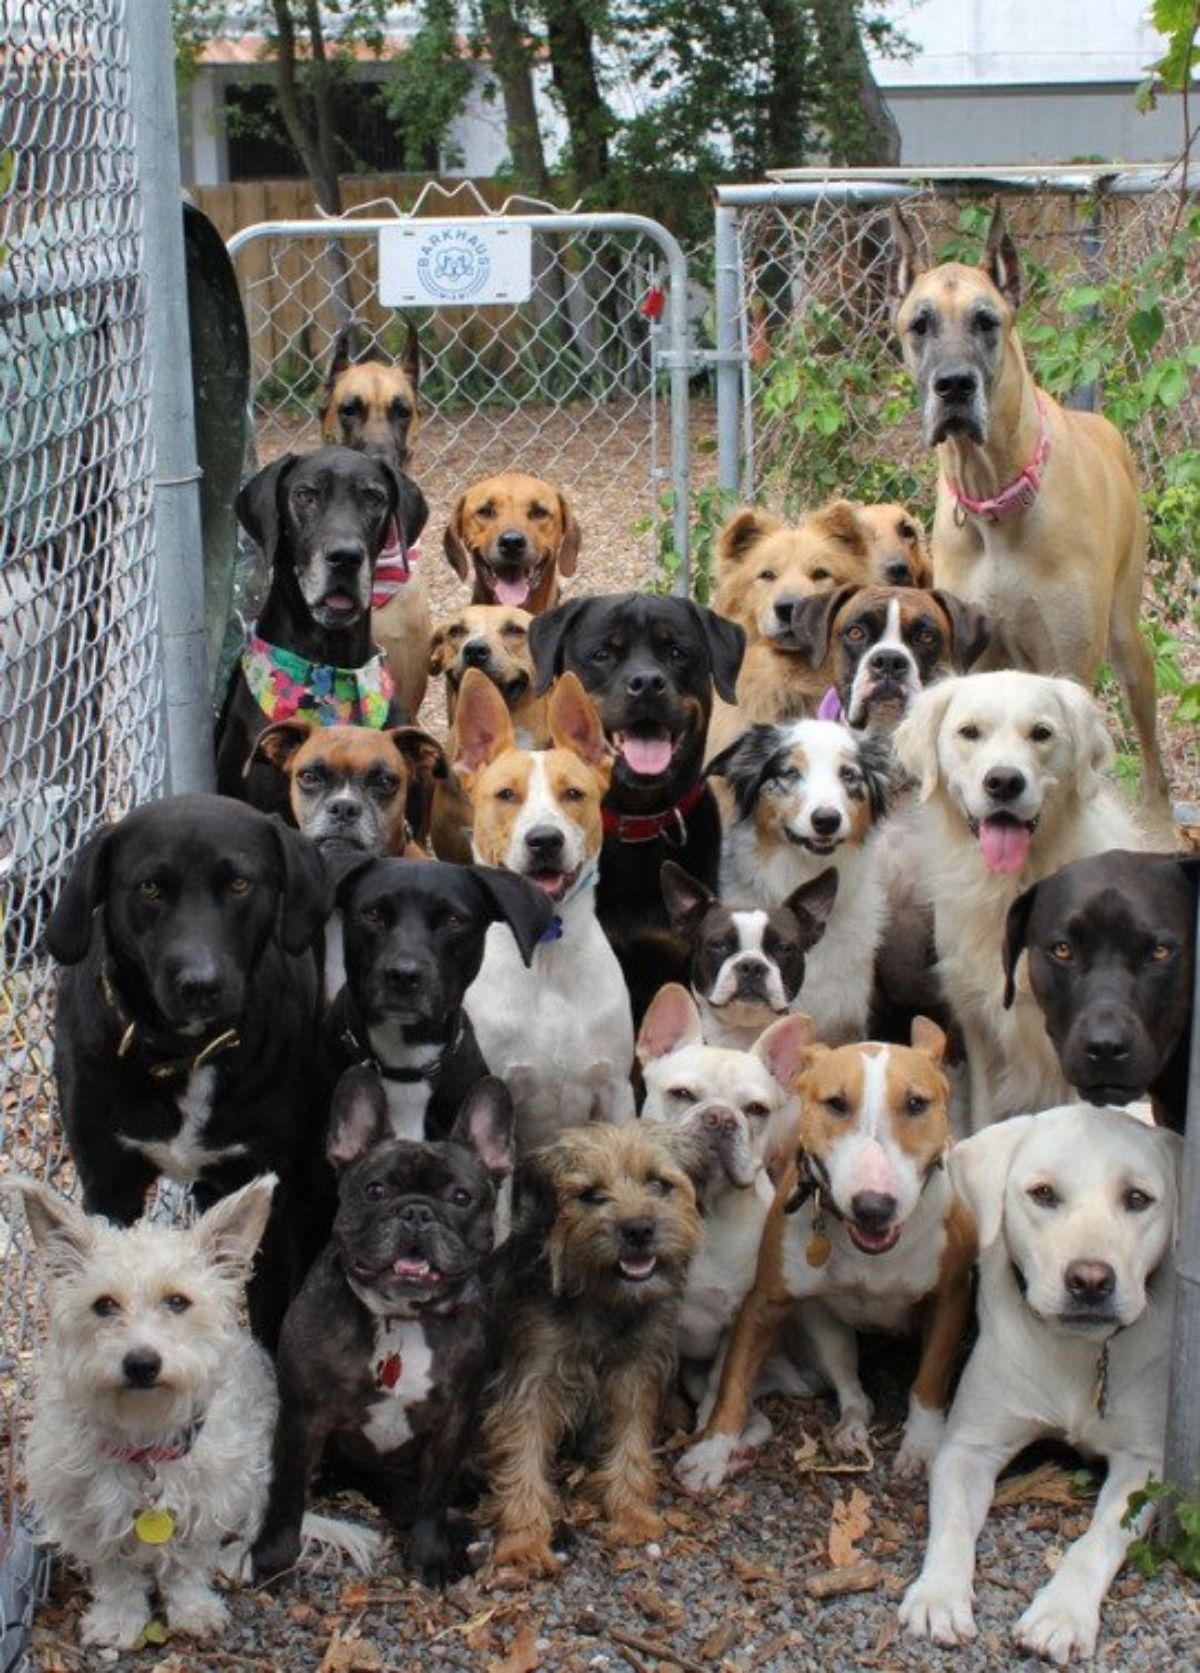 a group of dogs inside a small fenced-in area